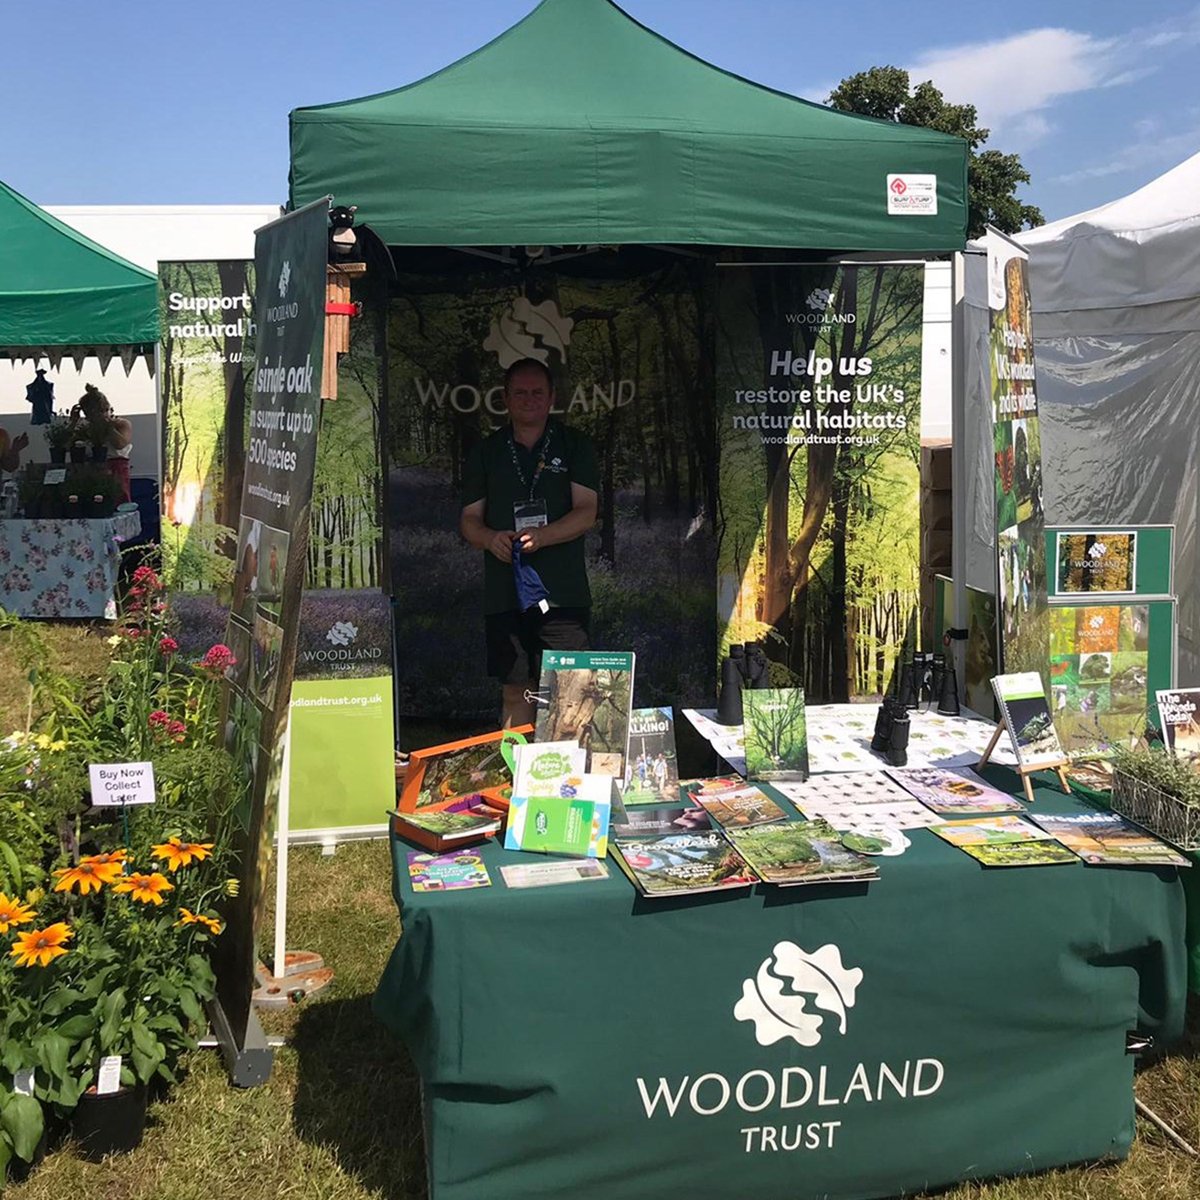 Happy #EarthDay 🌍We're proud to be the trusted supplier for many remarkable organizations committed to safeguarding our planet, such as @WoodlandTrust 🌲🌳